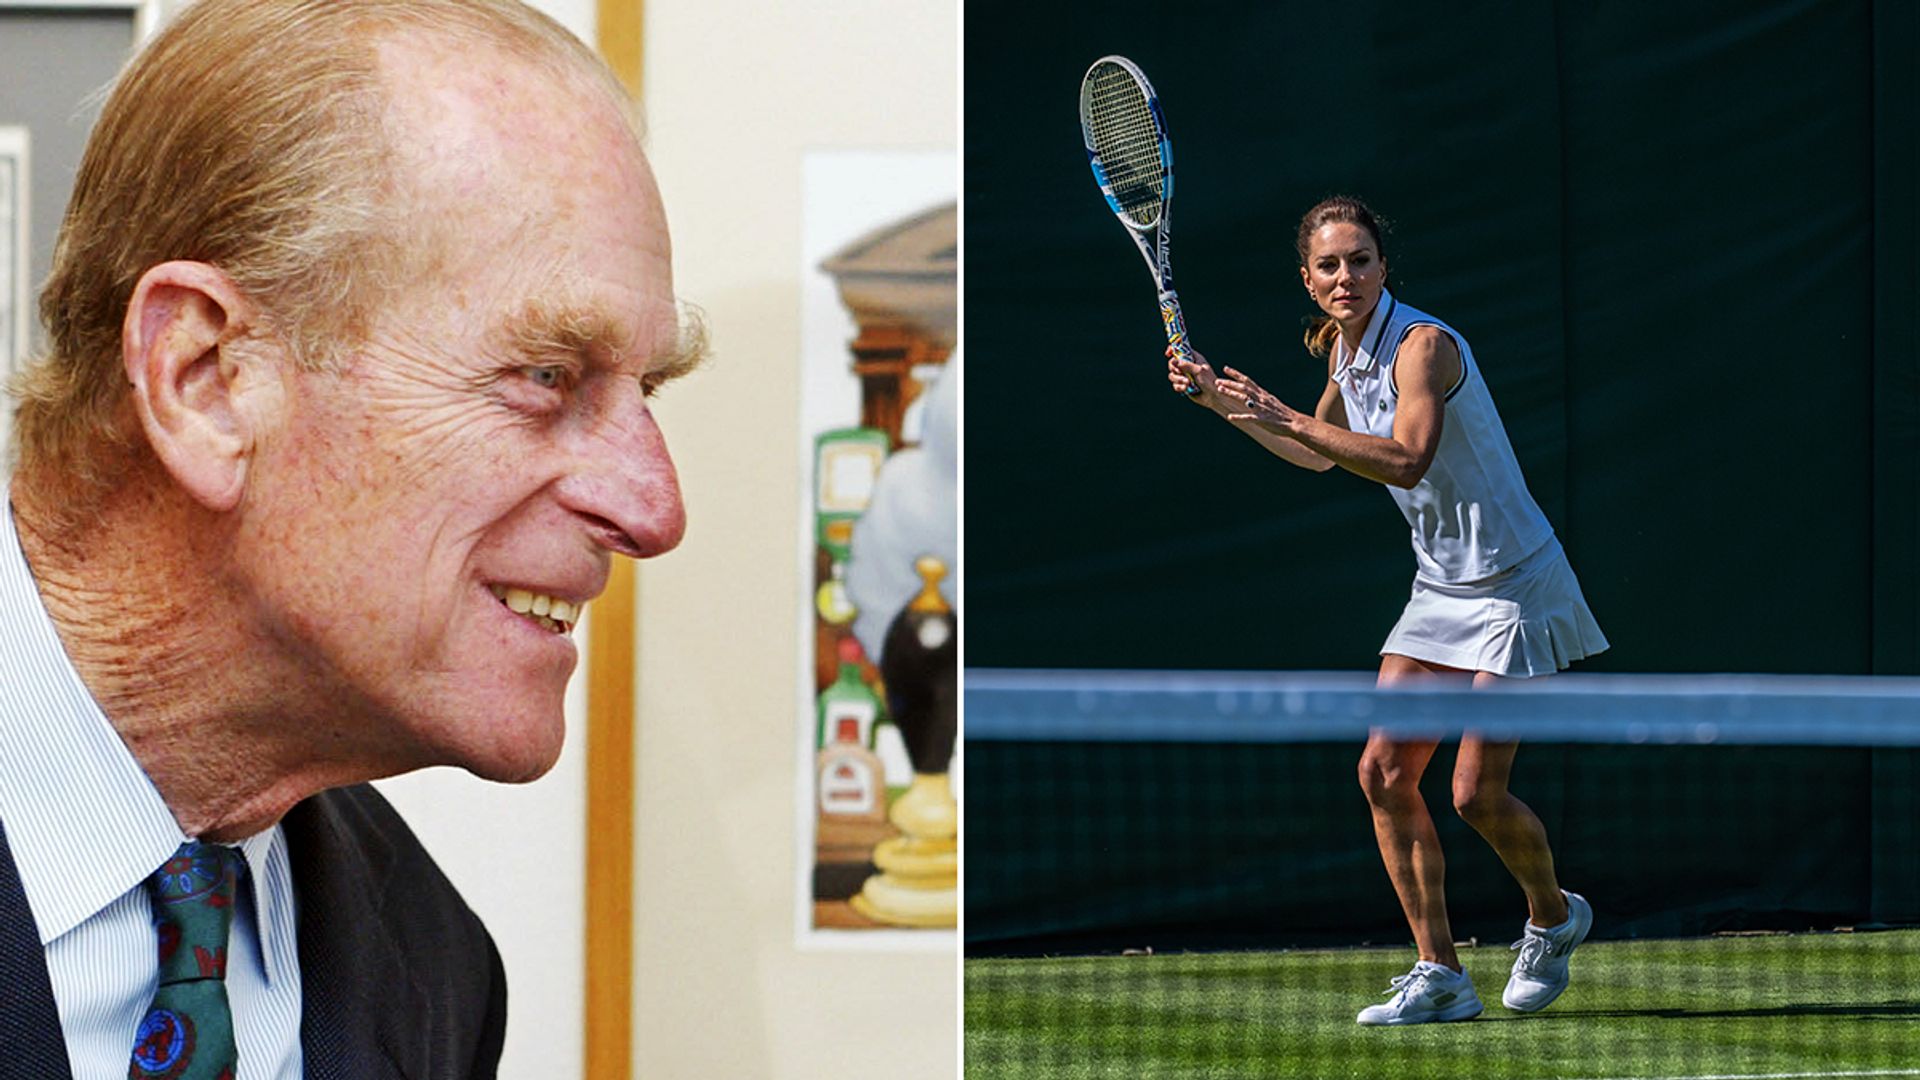 The Royal Family's hidden talents and hobbies revealed – from sporty Kate Middleton to painter Prince Philip